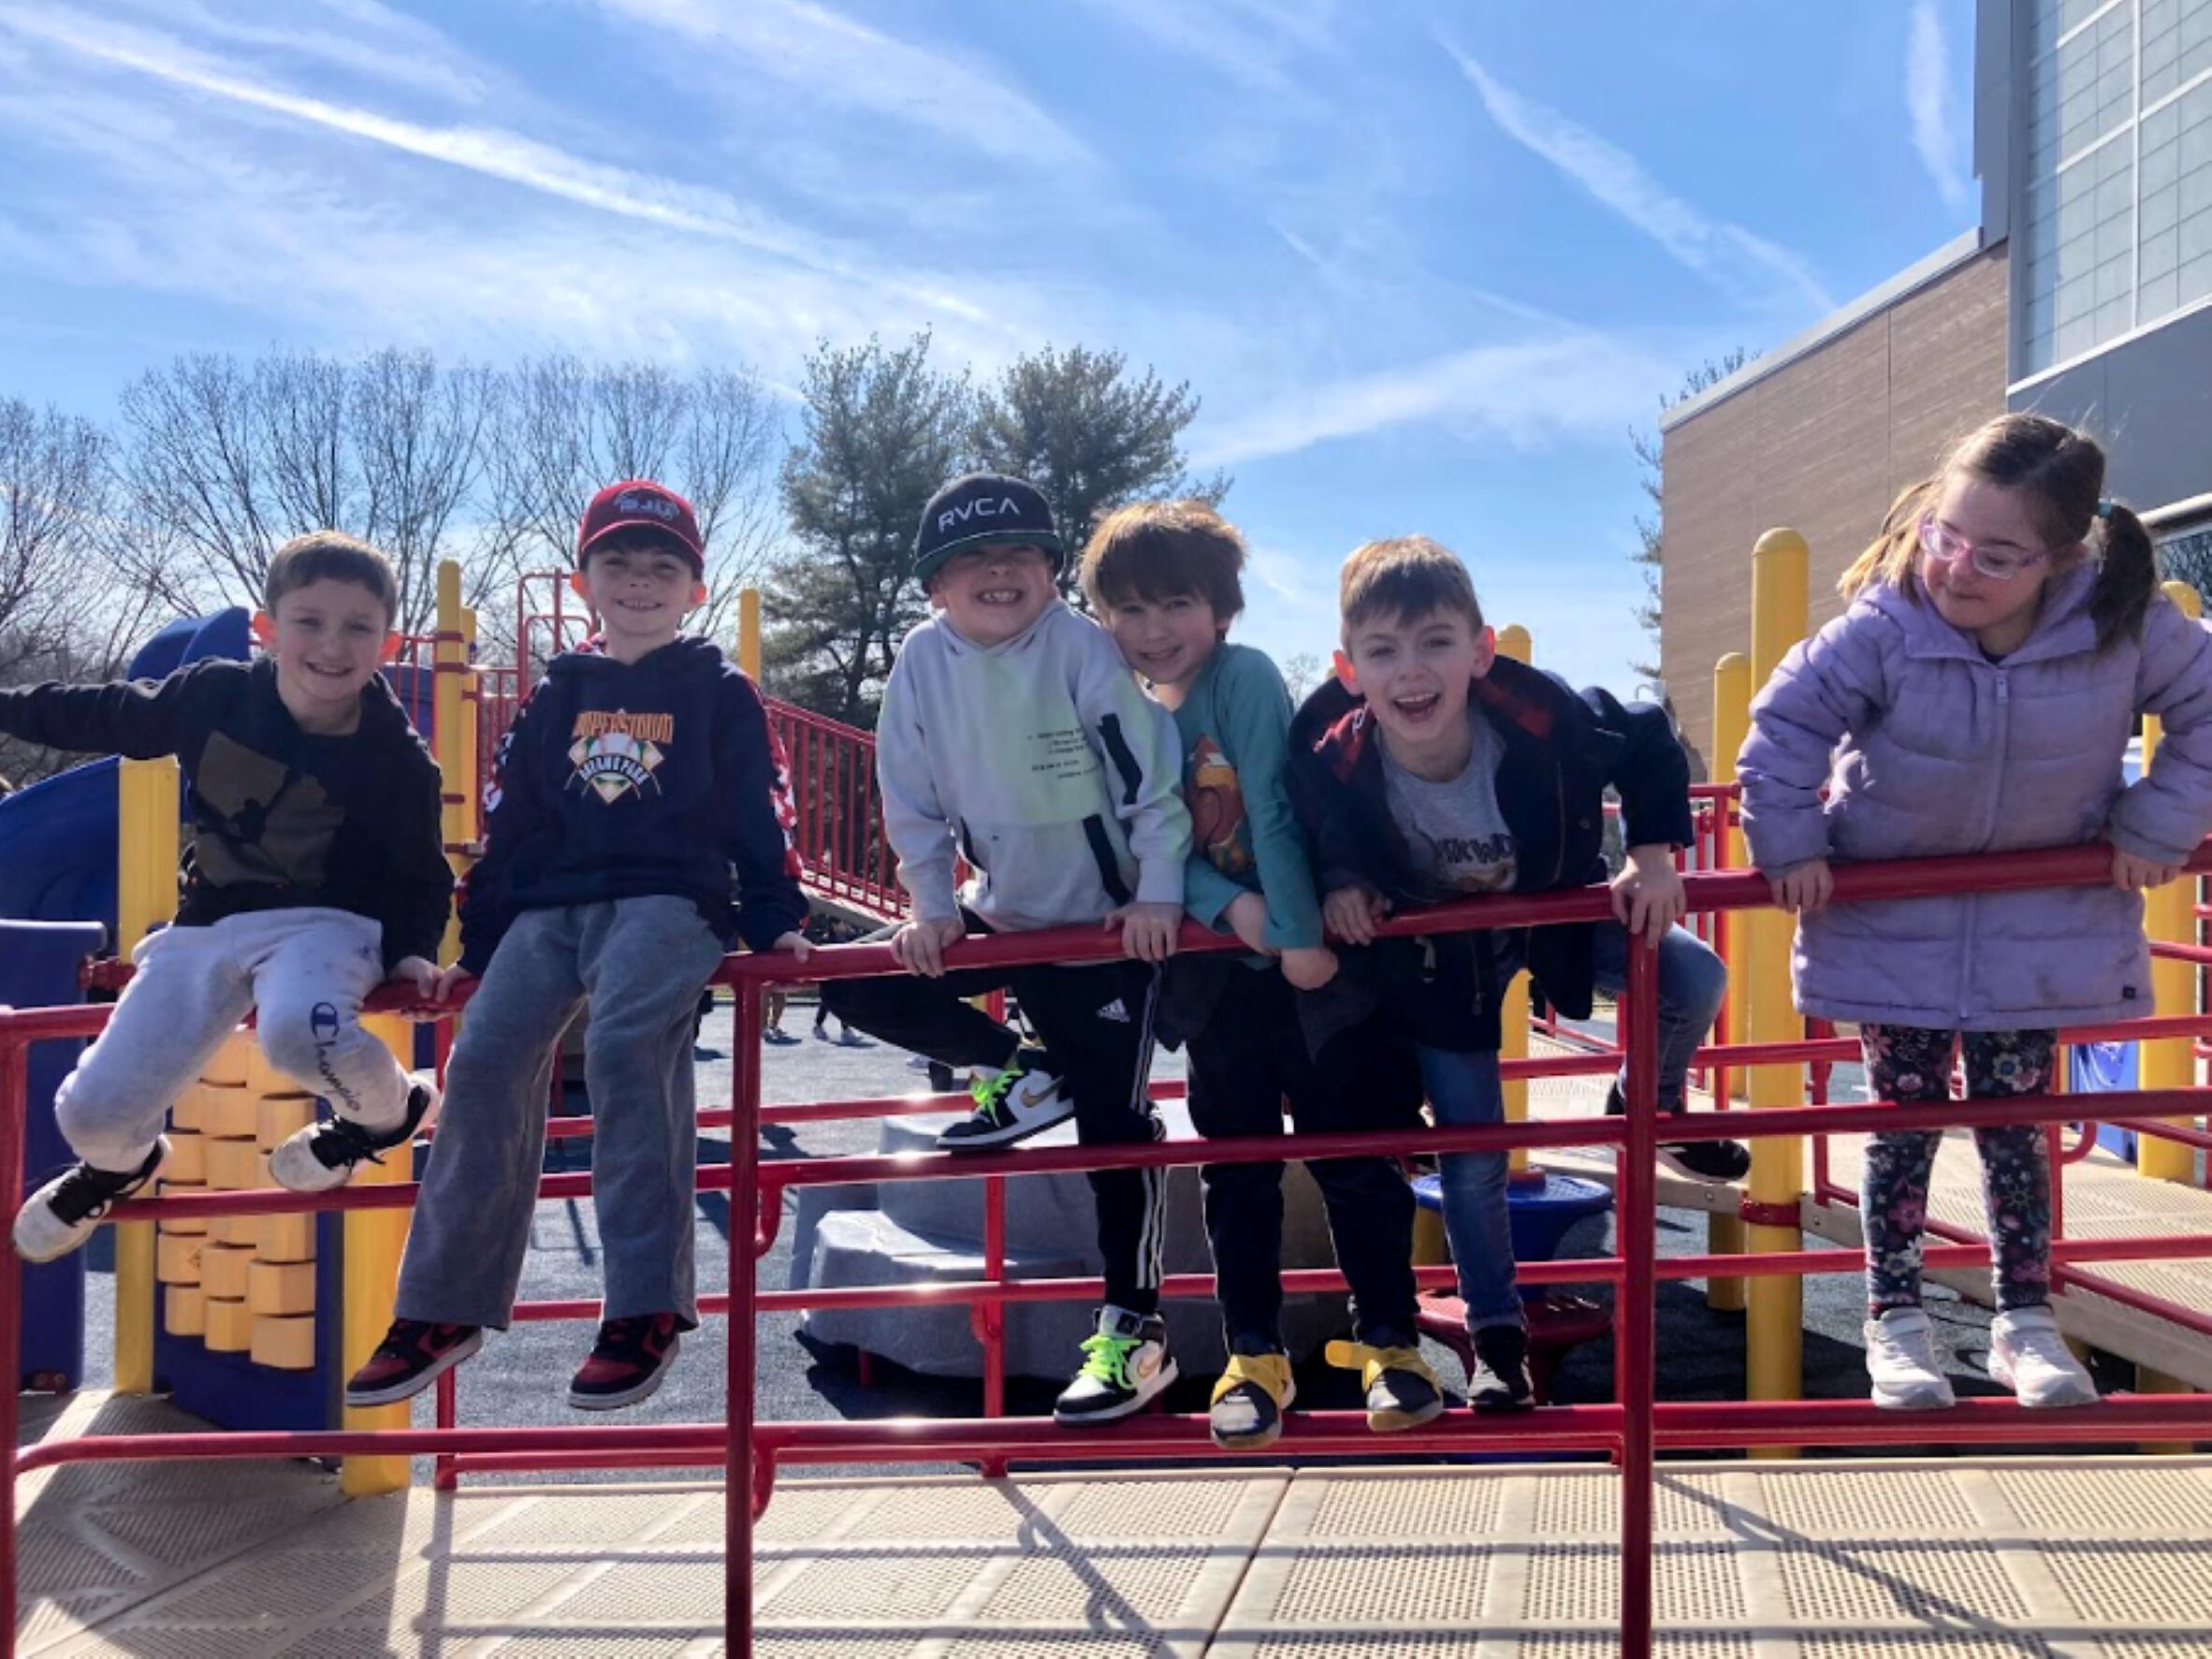 Enf- Six students standing and sitting on a railing in the playground